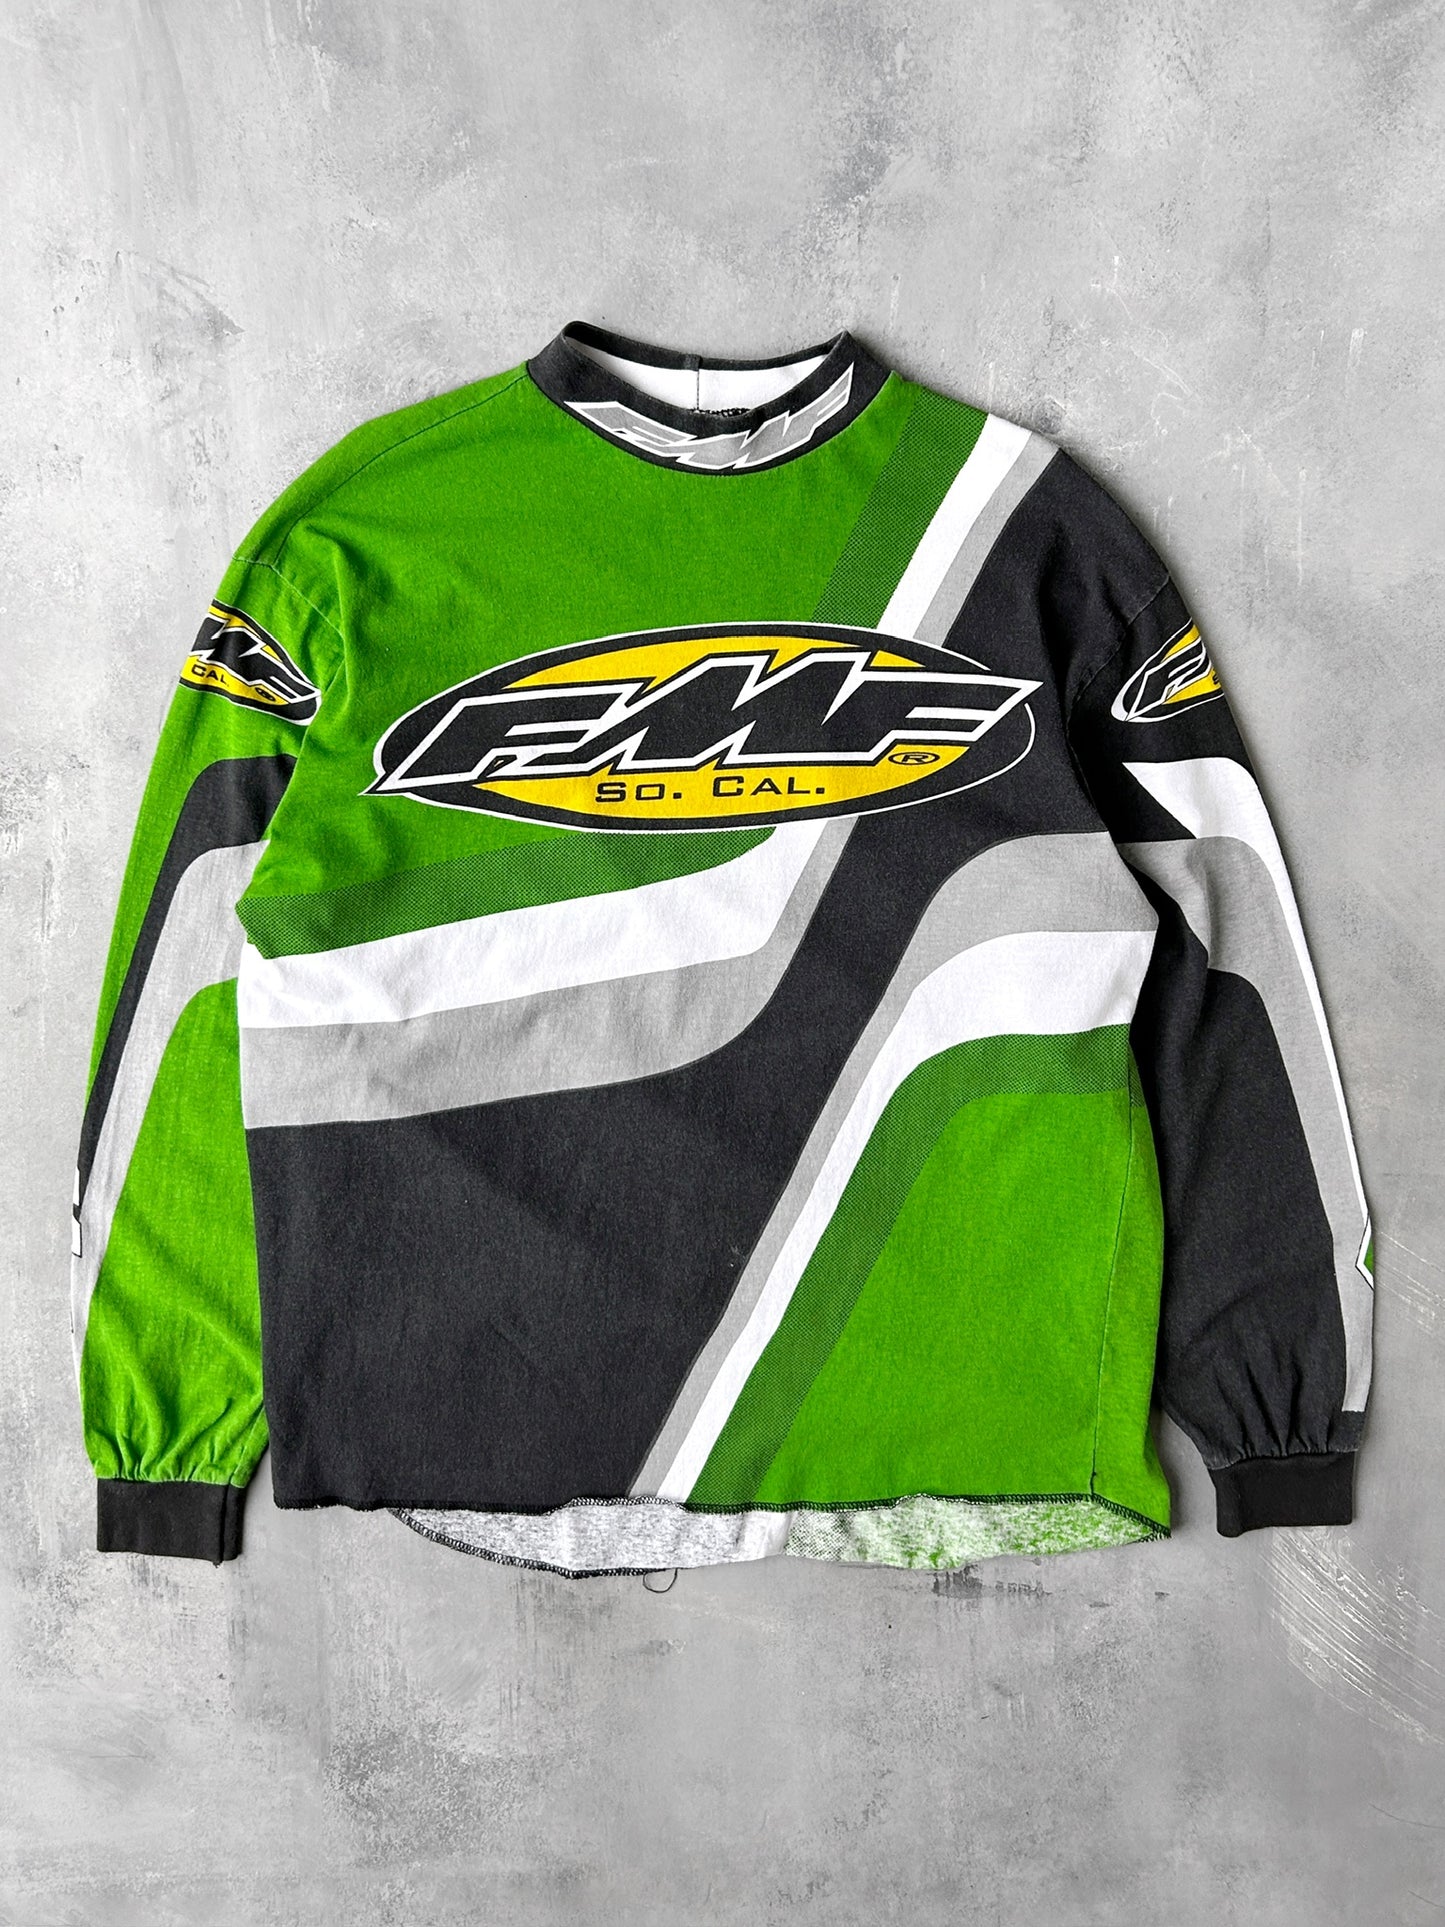 FMF Jersey 90's - Large